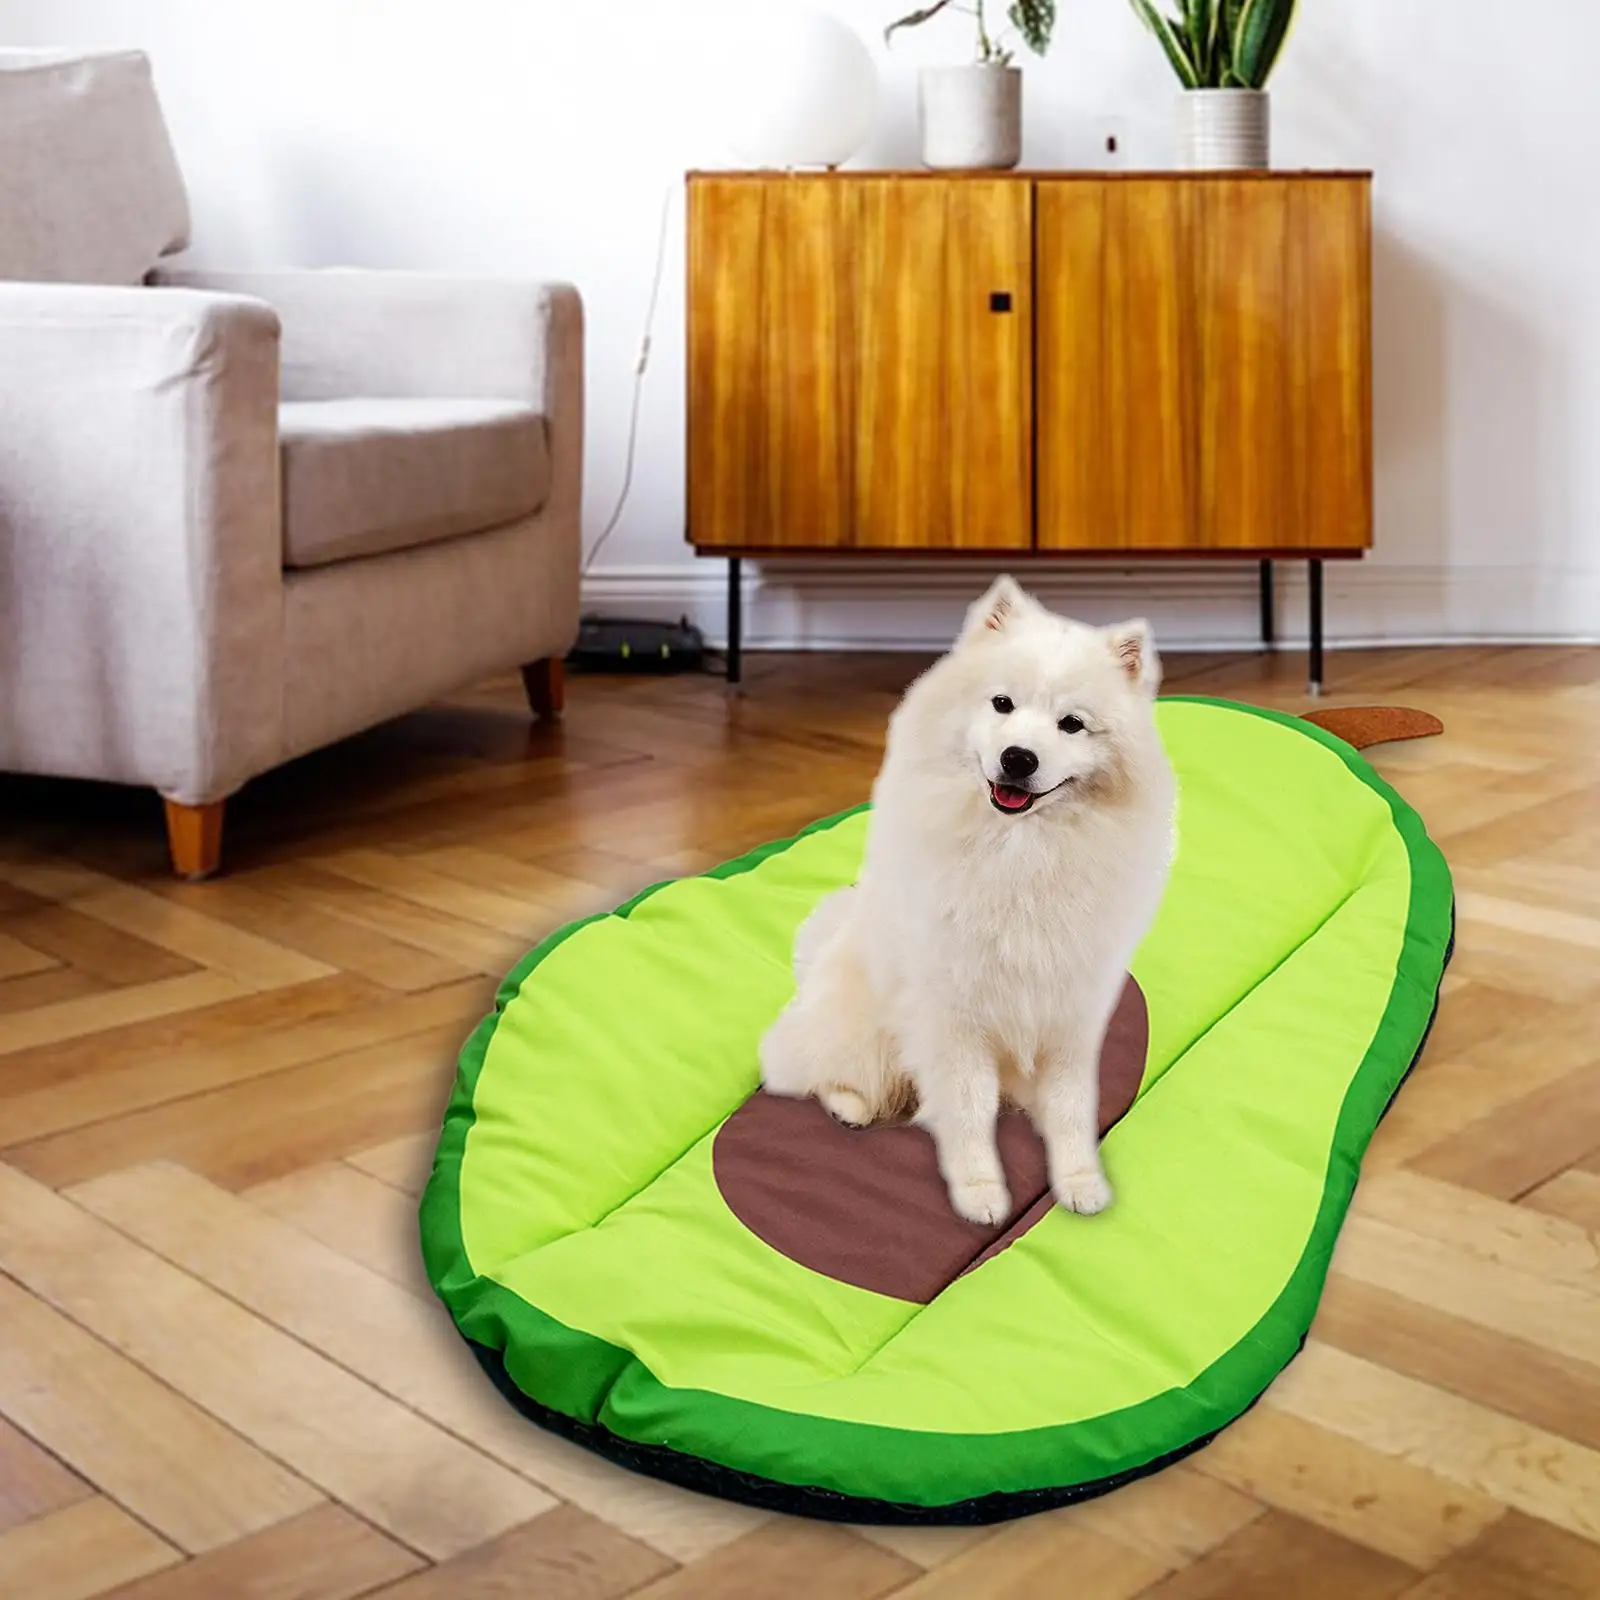 Cute Pet Blanket Dog Sleeping Pad Cat Bed Mat Crate Pad Winter Bedding Creative Kennel Cushion for Small Dogs Kitten Home Decor